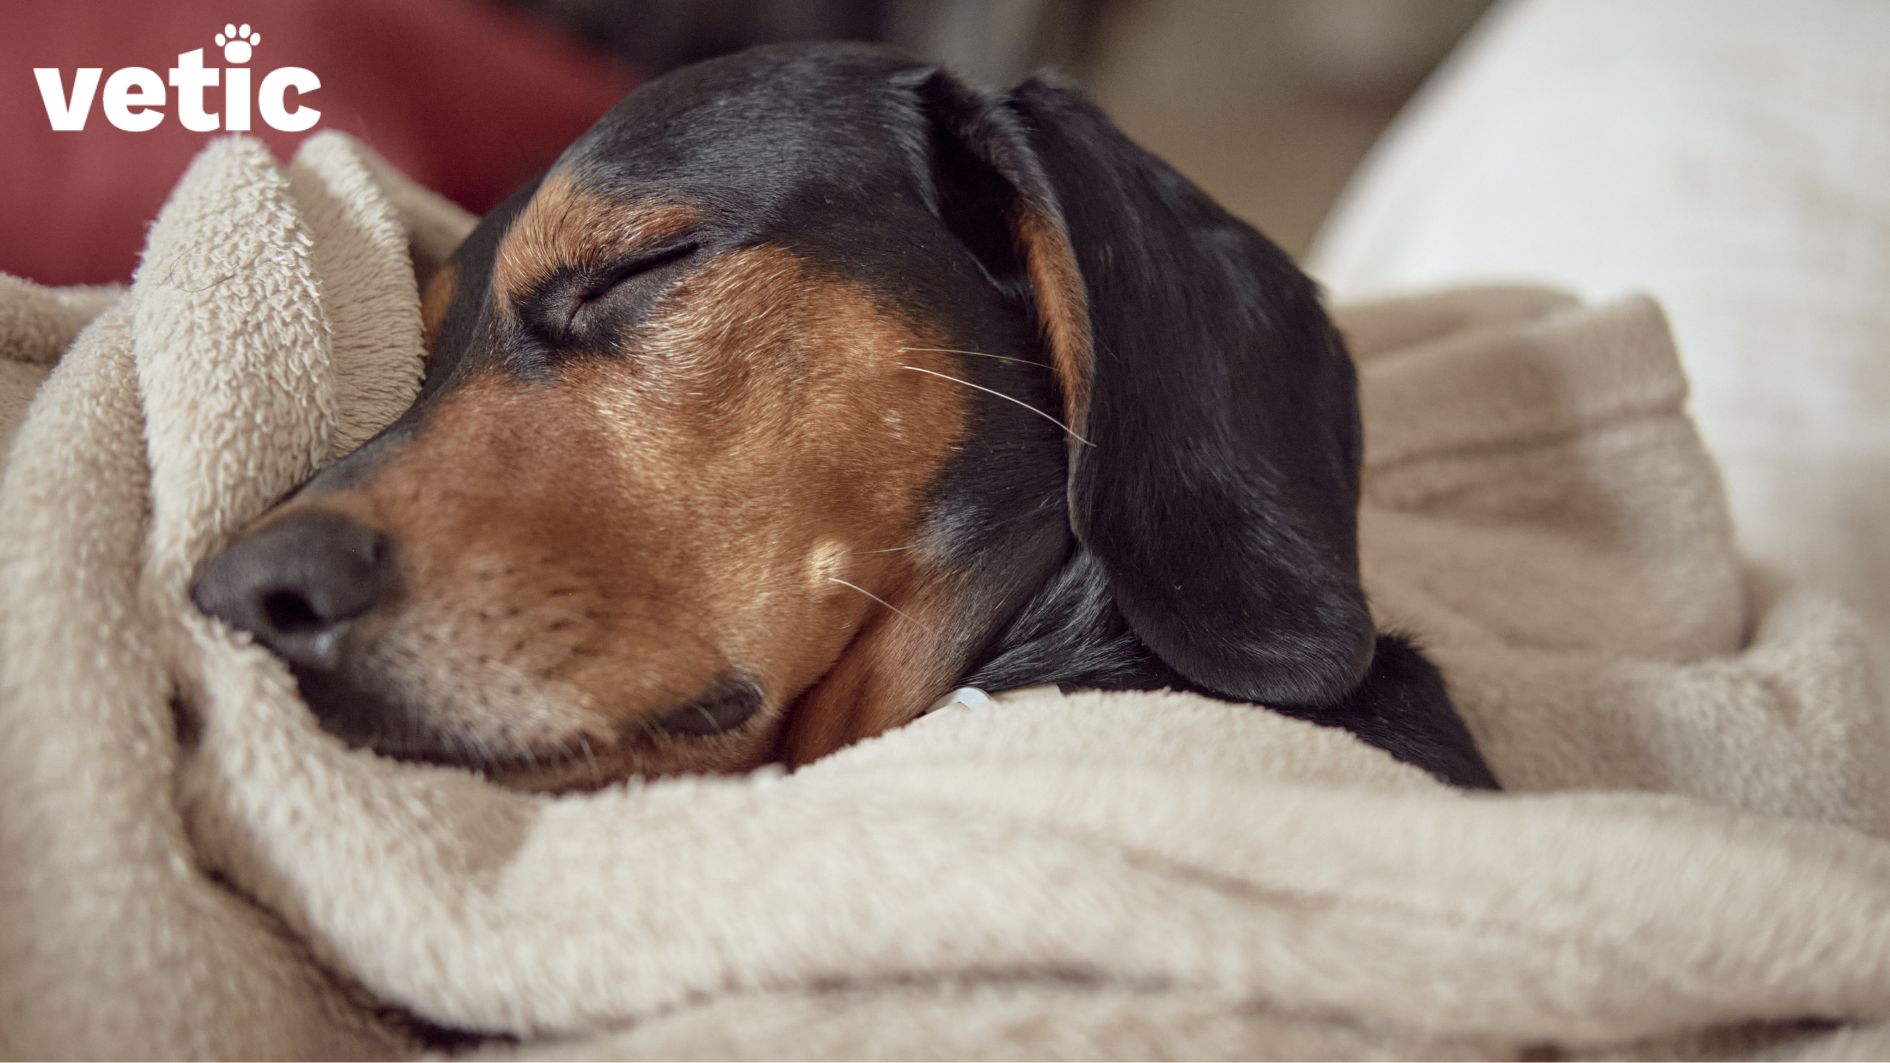 Dachshund puppy lying in bed wrapped in a cream towel. Only the pup's left side of the face and ear are visible. Low body temperature is a serious emergency in pets.